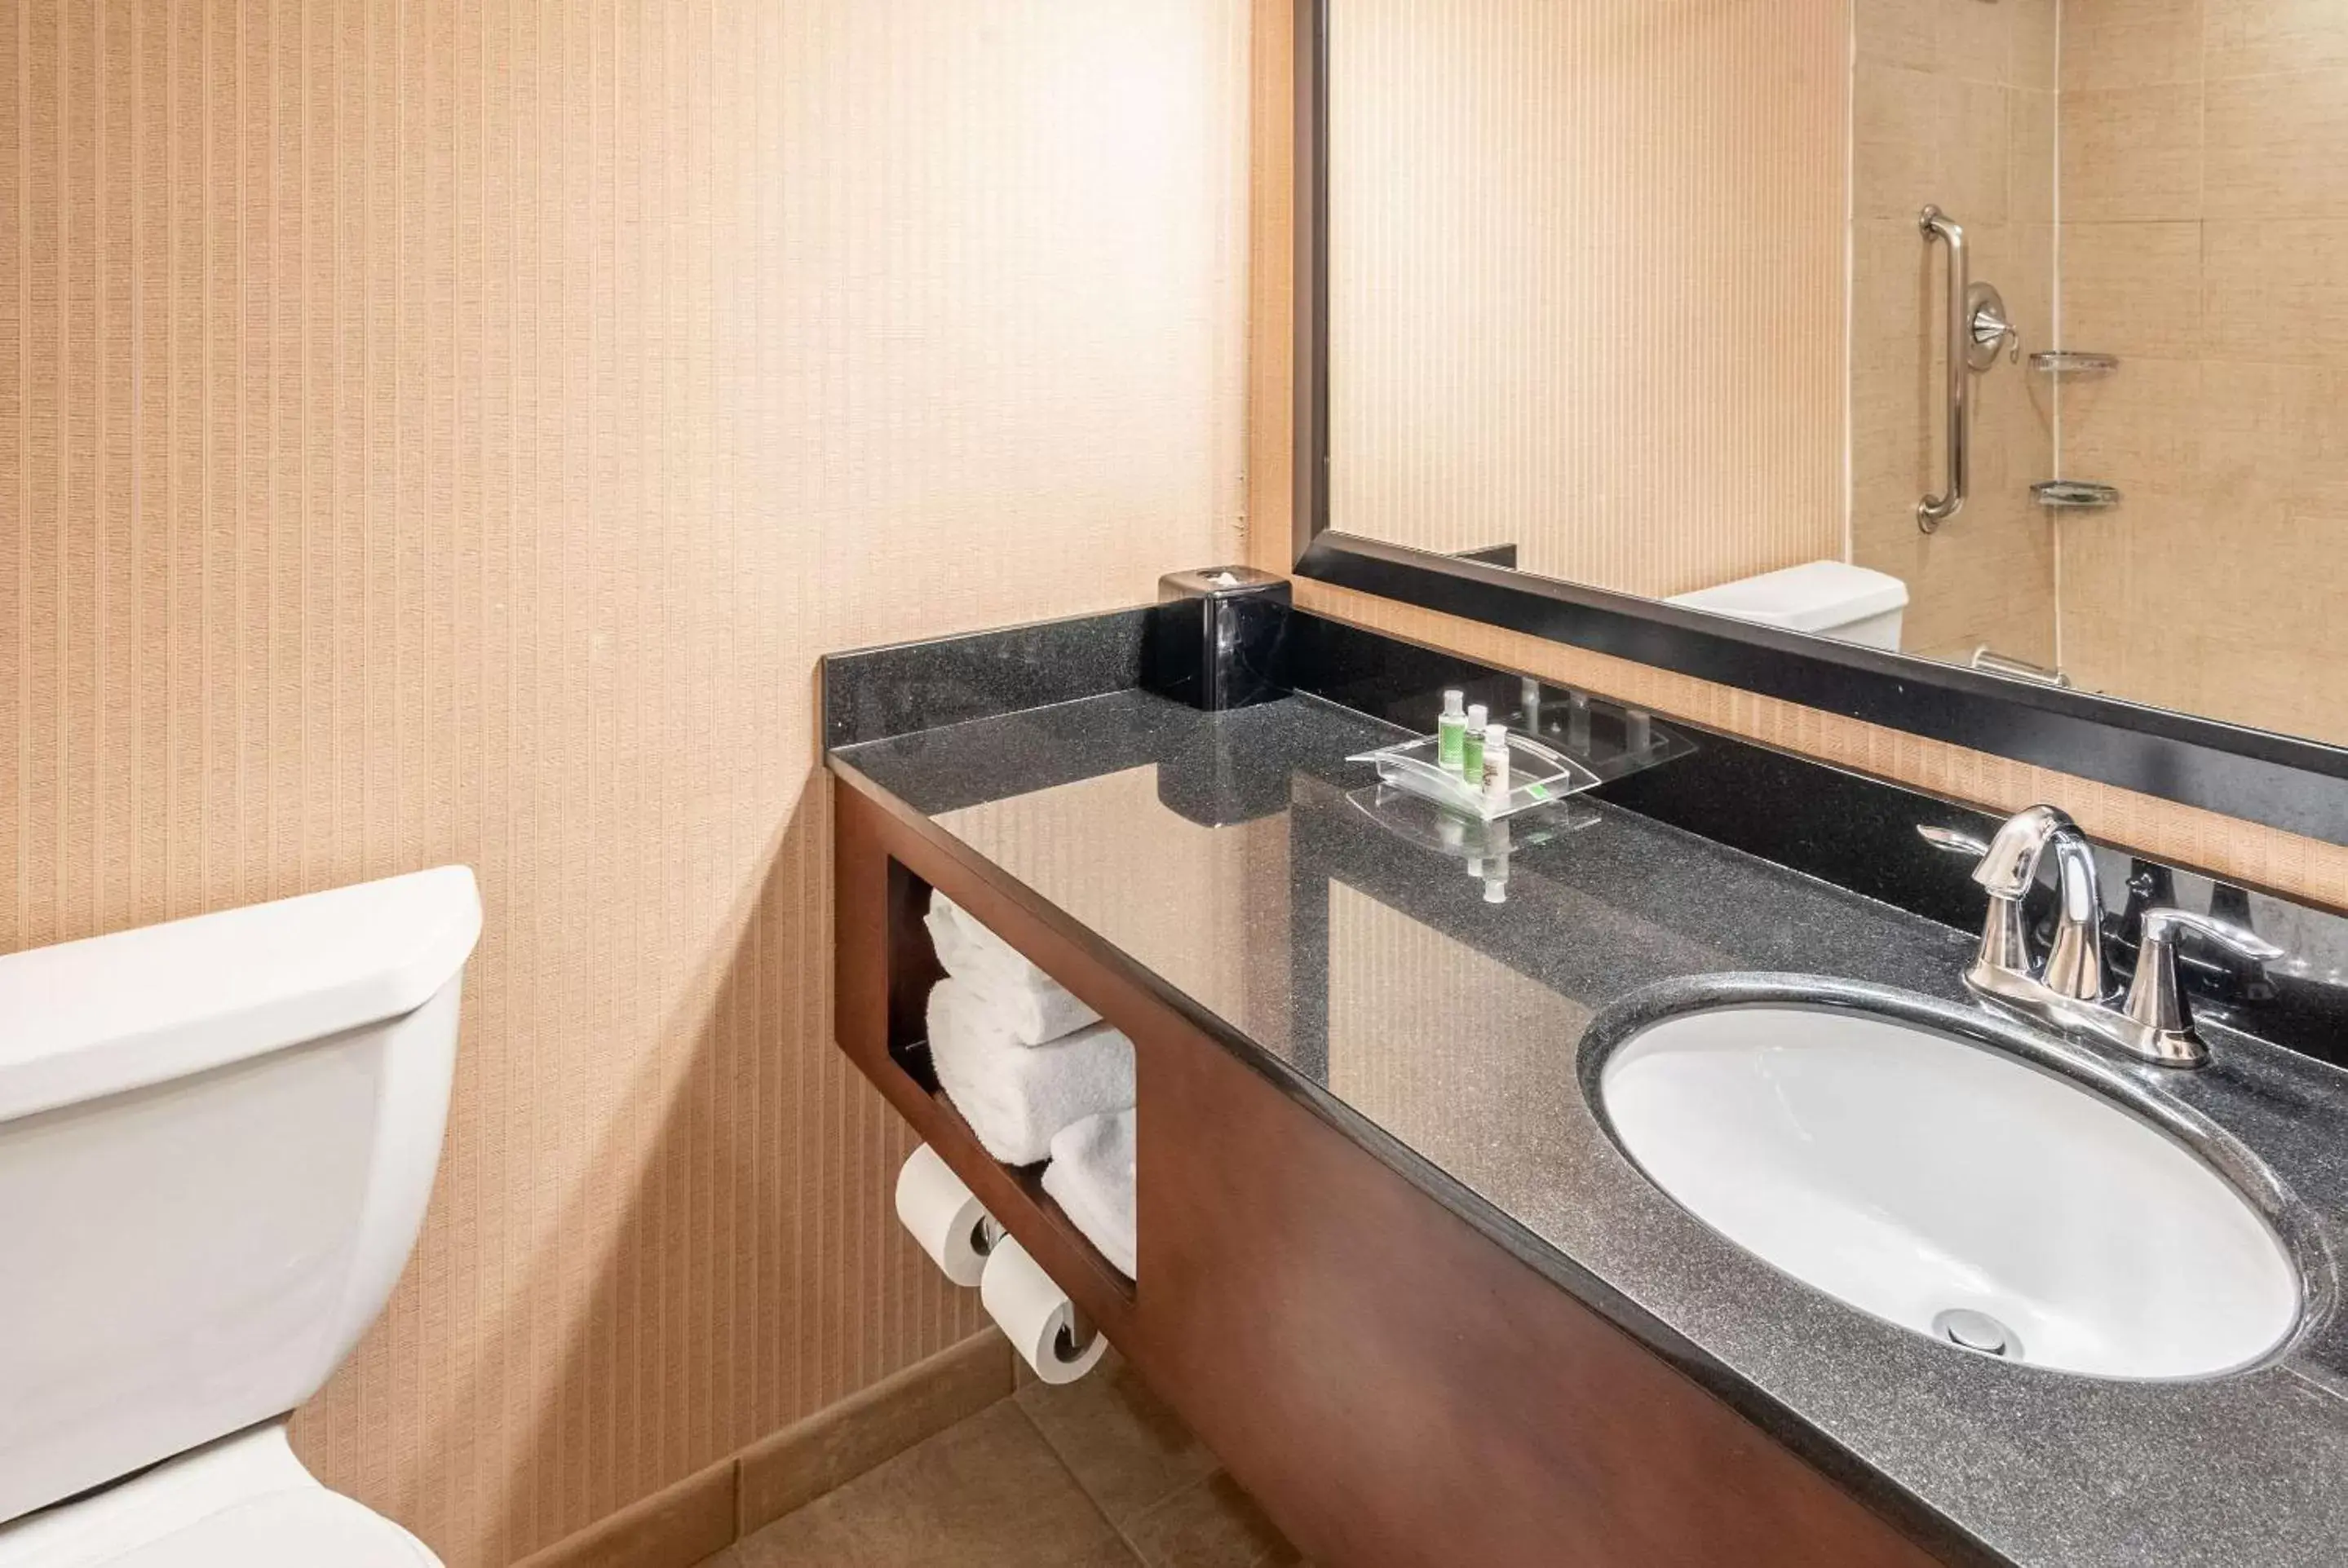 Bathroom in The Grand Hotel, Ascend Hotel Collection